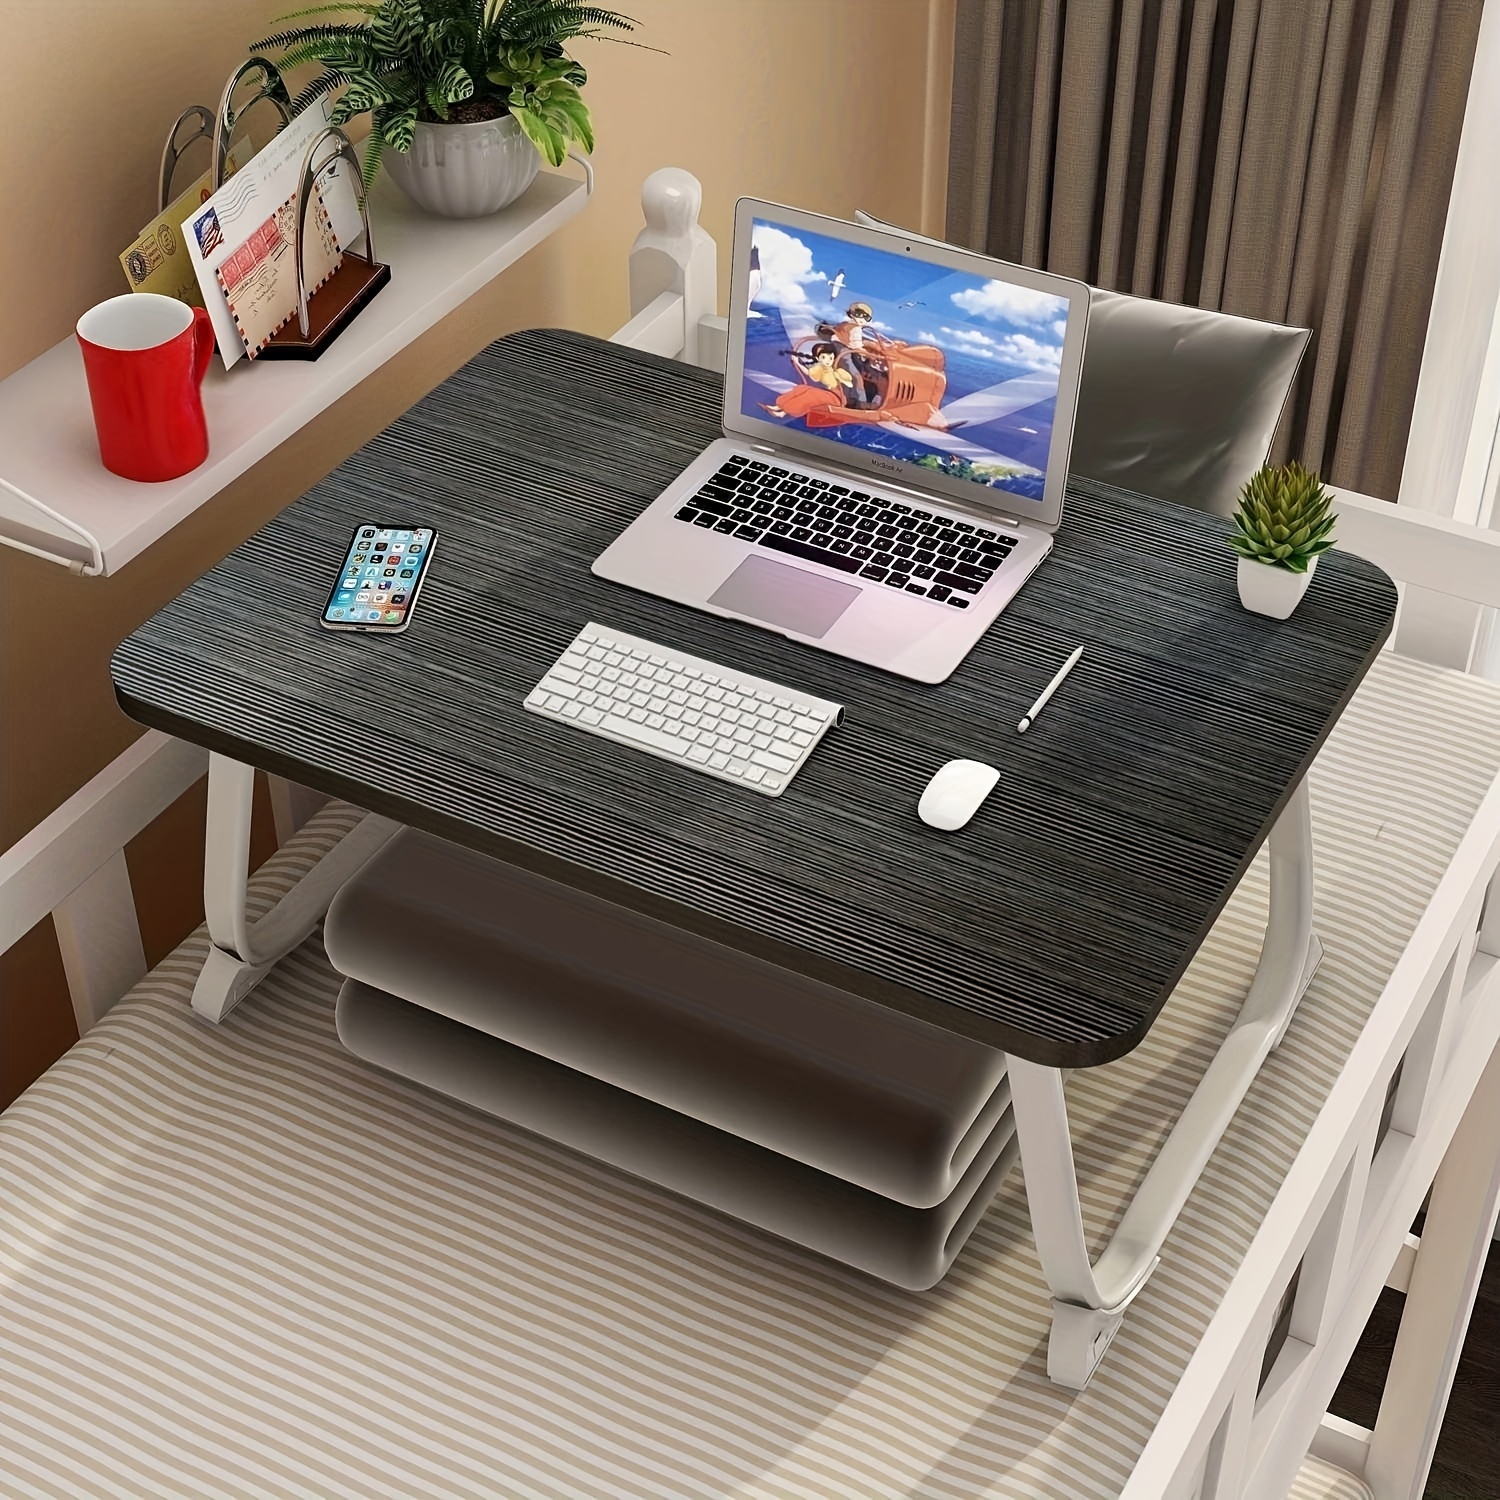 Laptop Lap Desk, Lightweight Portable Laptop Desk with Pillow Cushion, Fits  up to 14 inch Laptop, Lap Tray with Zippered Storage Pocket & Anti-Slip